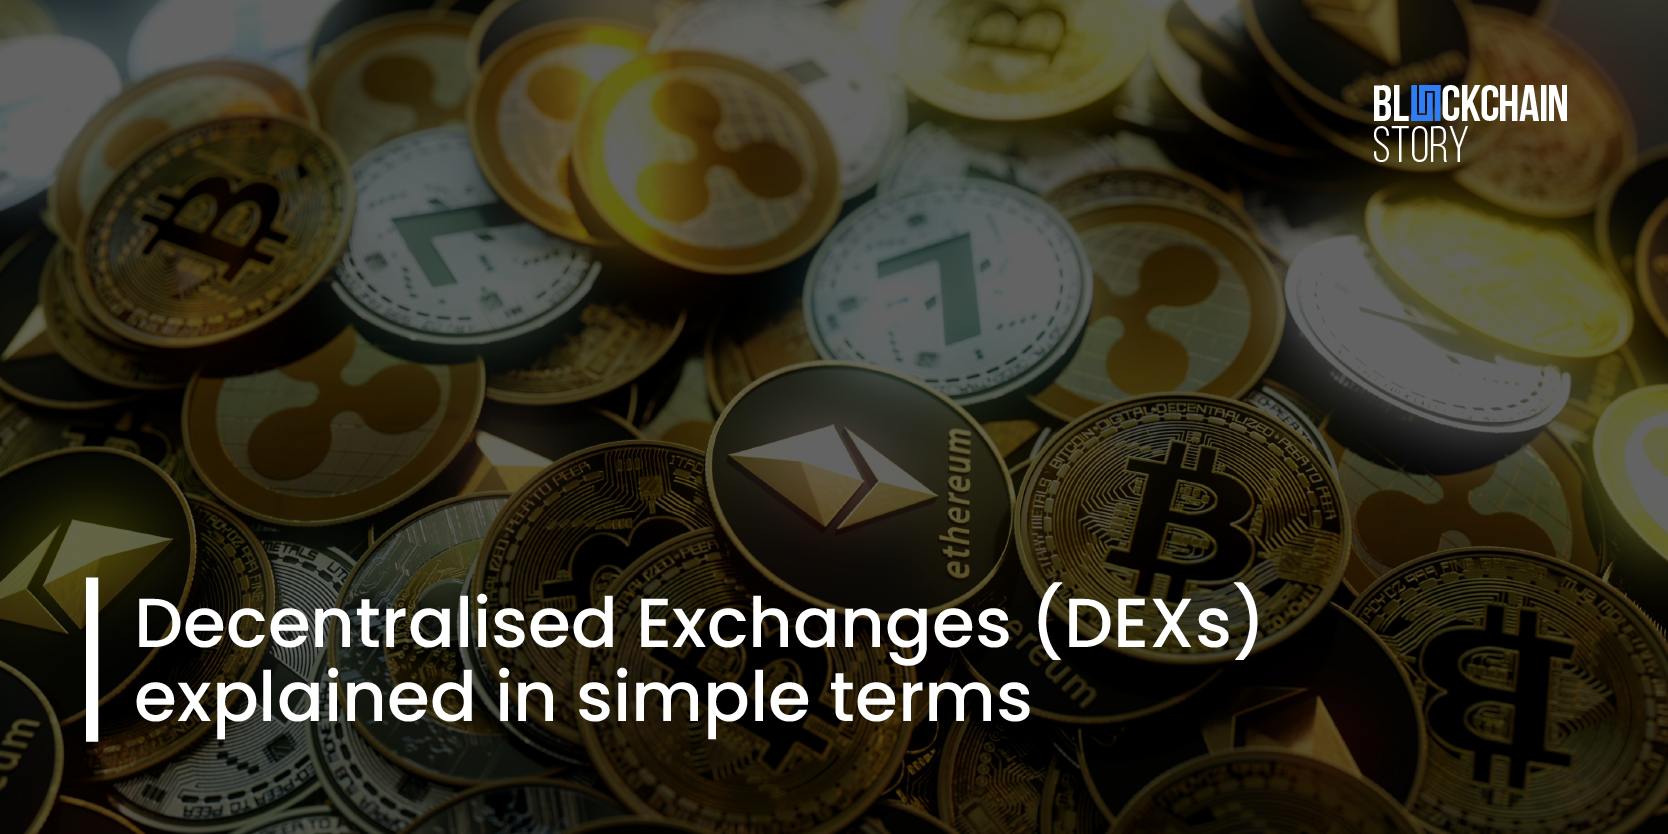 What are Decentralised Exchanges? Crypto DEXs vs centralised exchanges, UniSwap and more, explained in simple terms